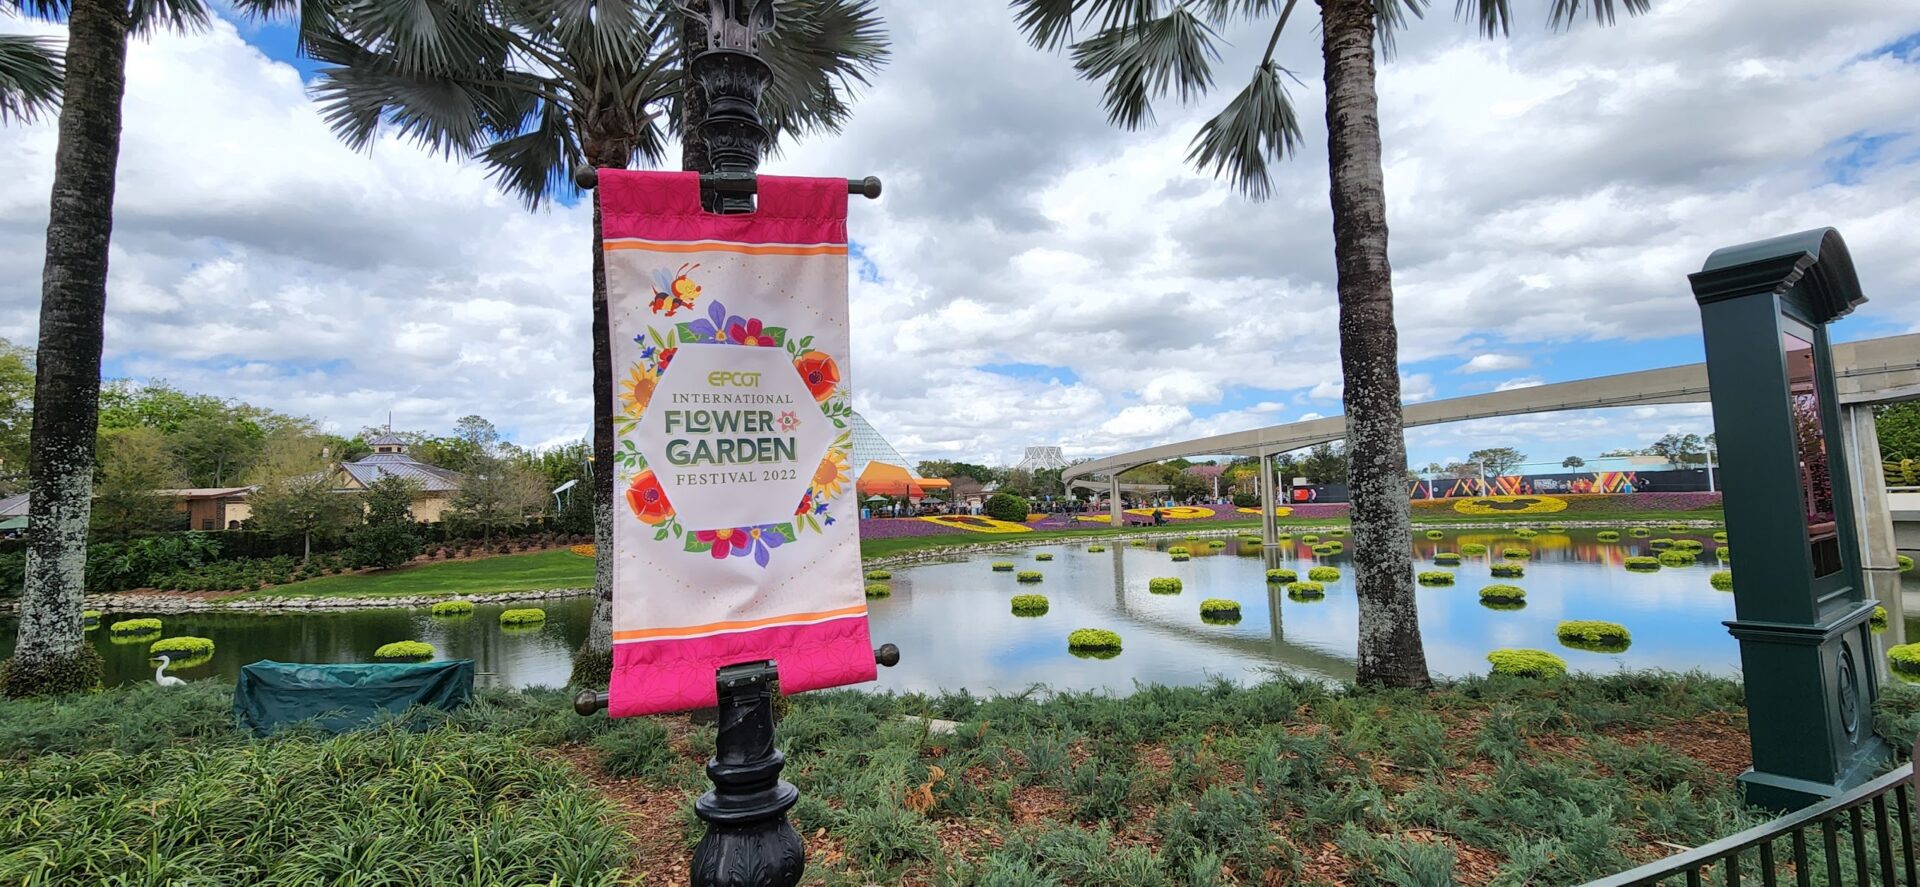 EPCOT International Flower and Garden Festival List of Outdoor Kitchens for 2023